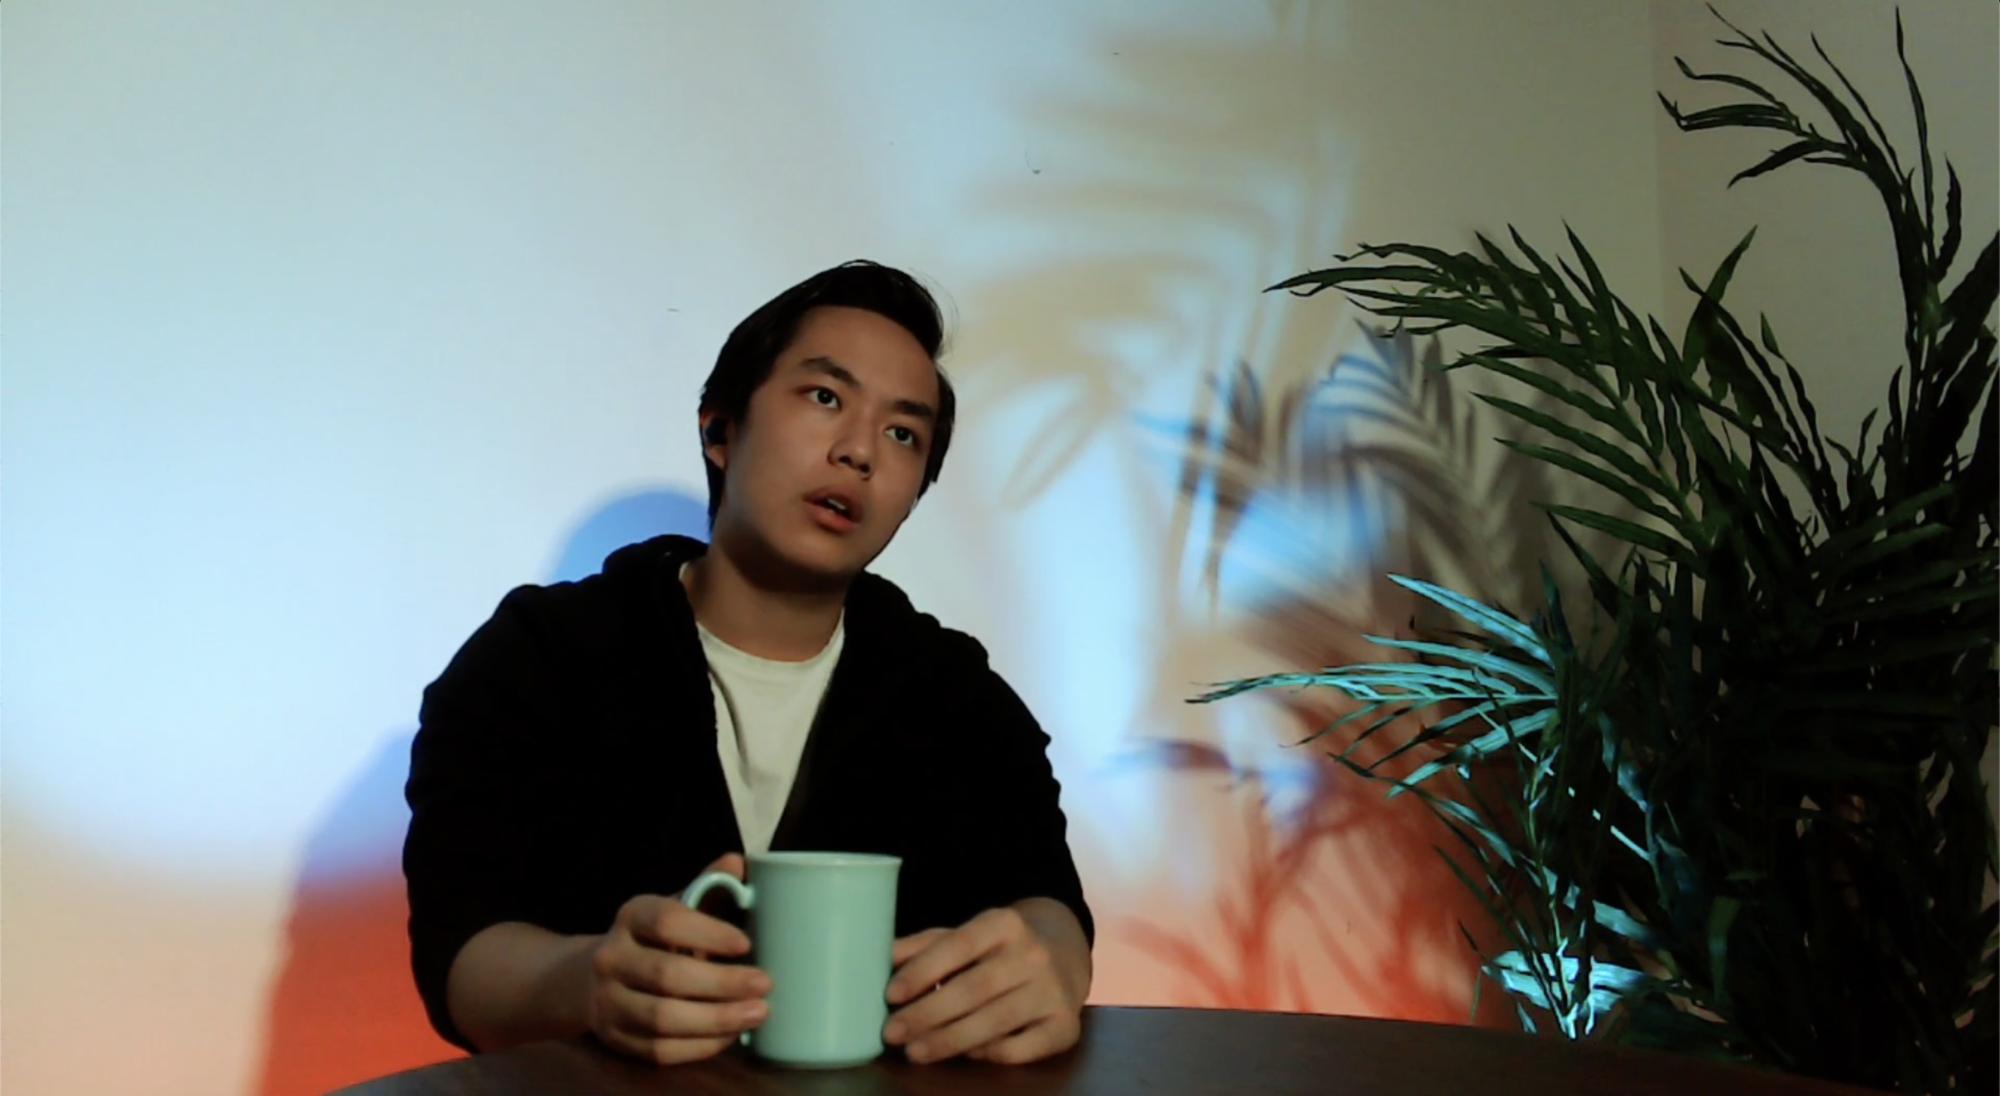 a man with short black hair holding a coffee mug sits at a table, with blue and red light on the wall behind him